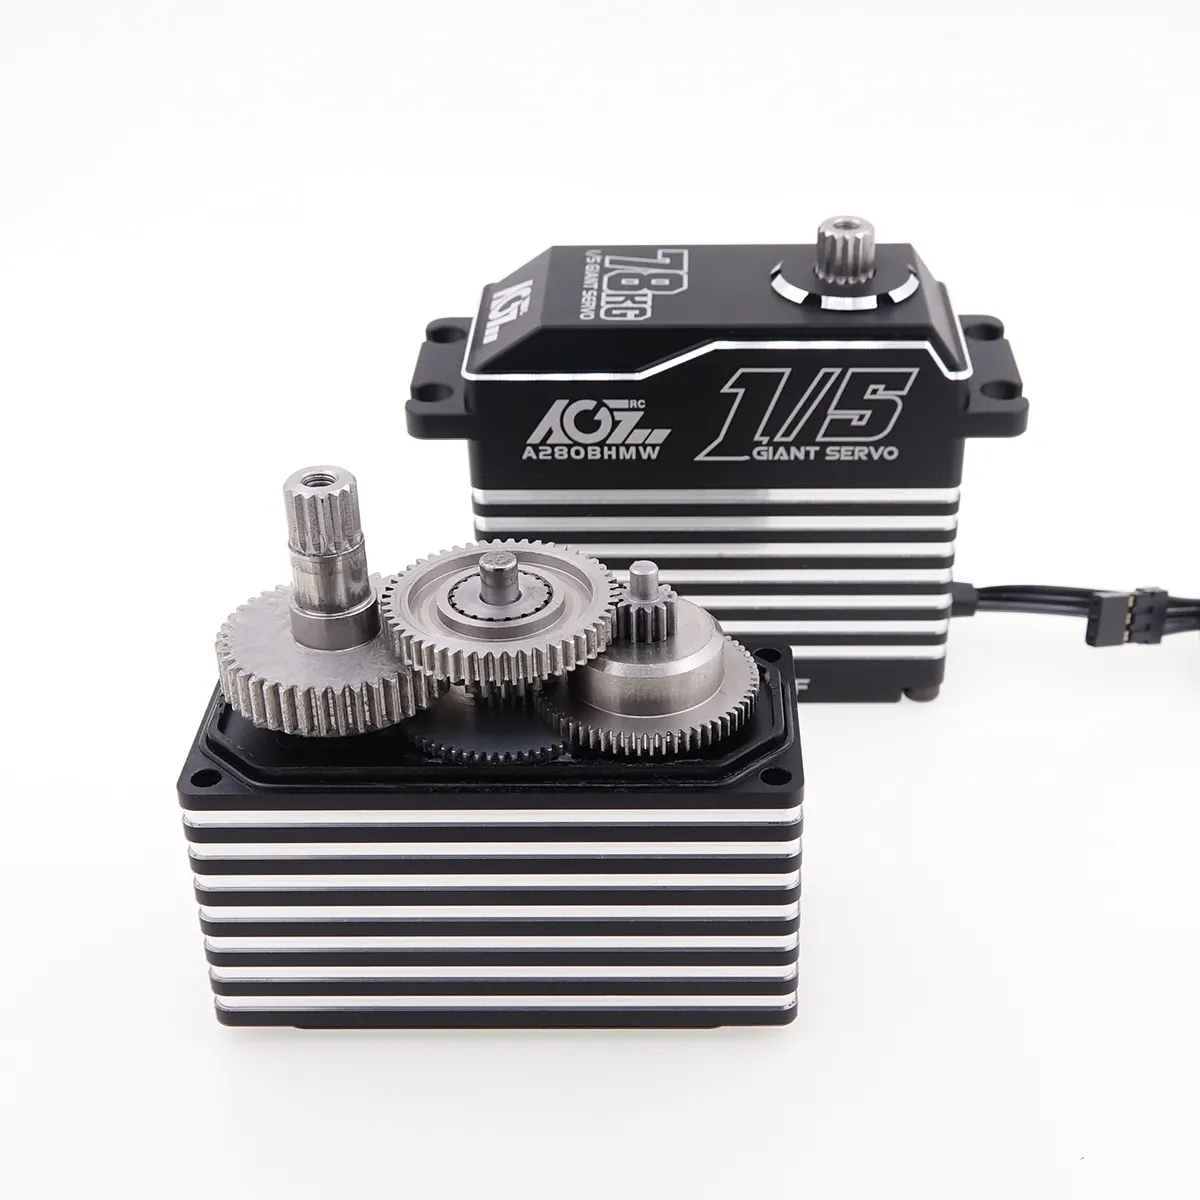 AGFrc 5th giant 78KG A280BHMW Brushless Waterproof Servo For RC 1/5 Rally Cars